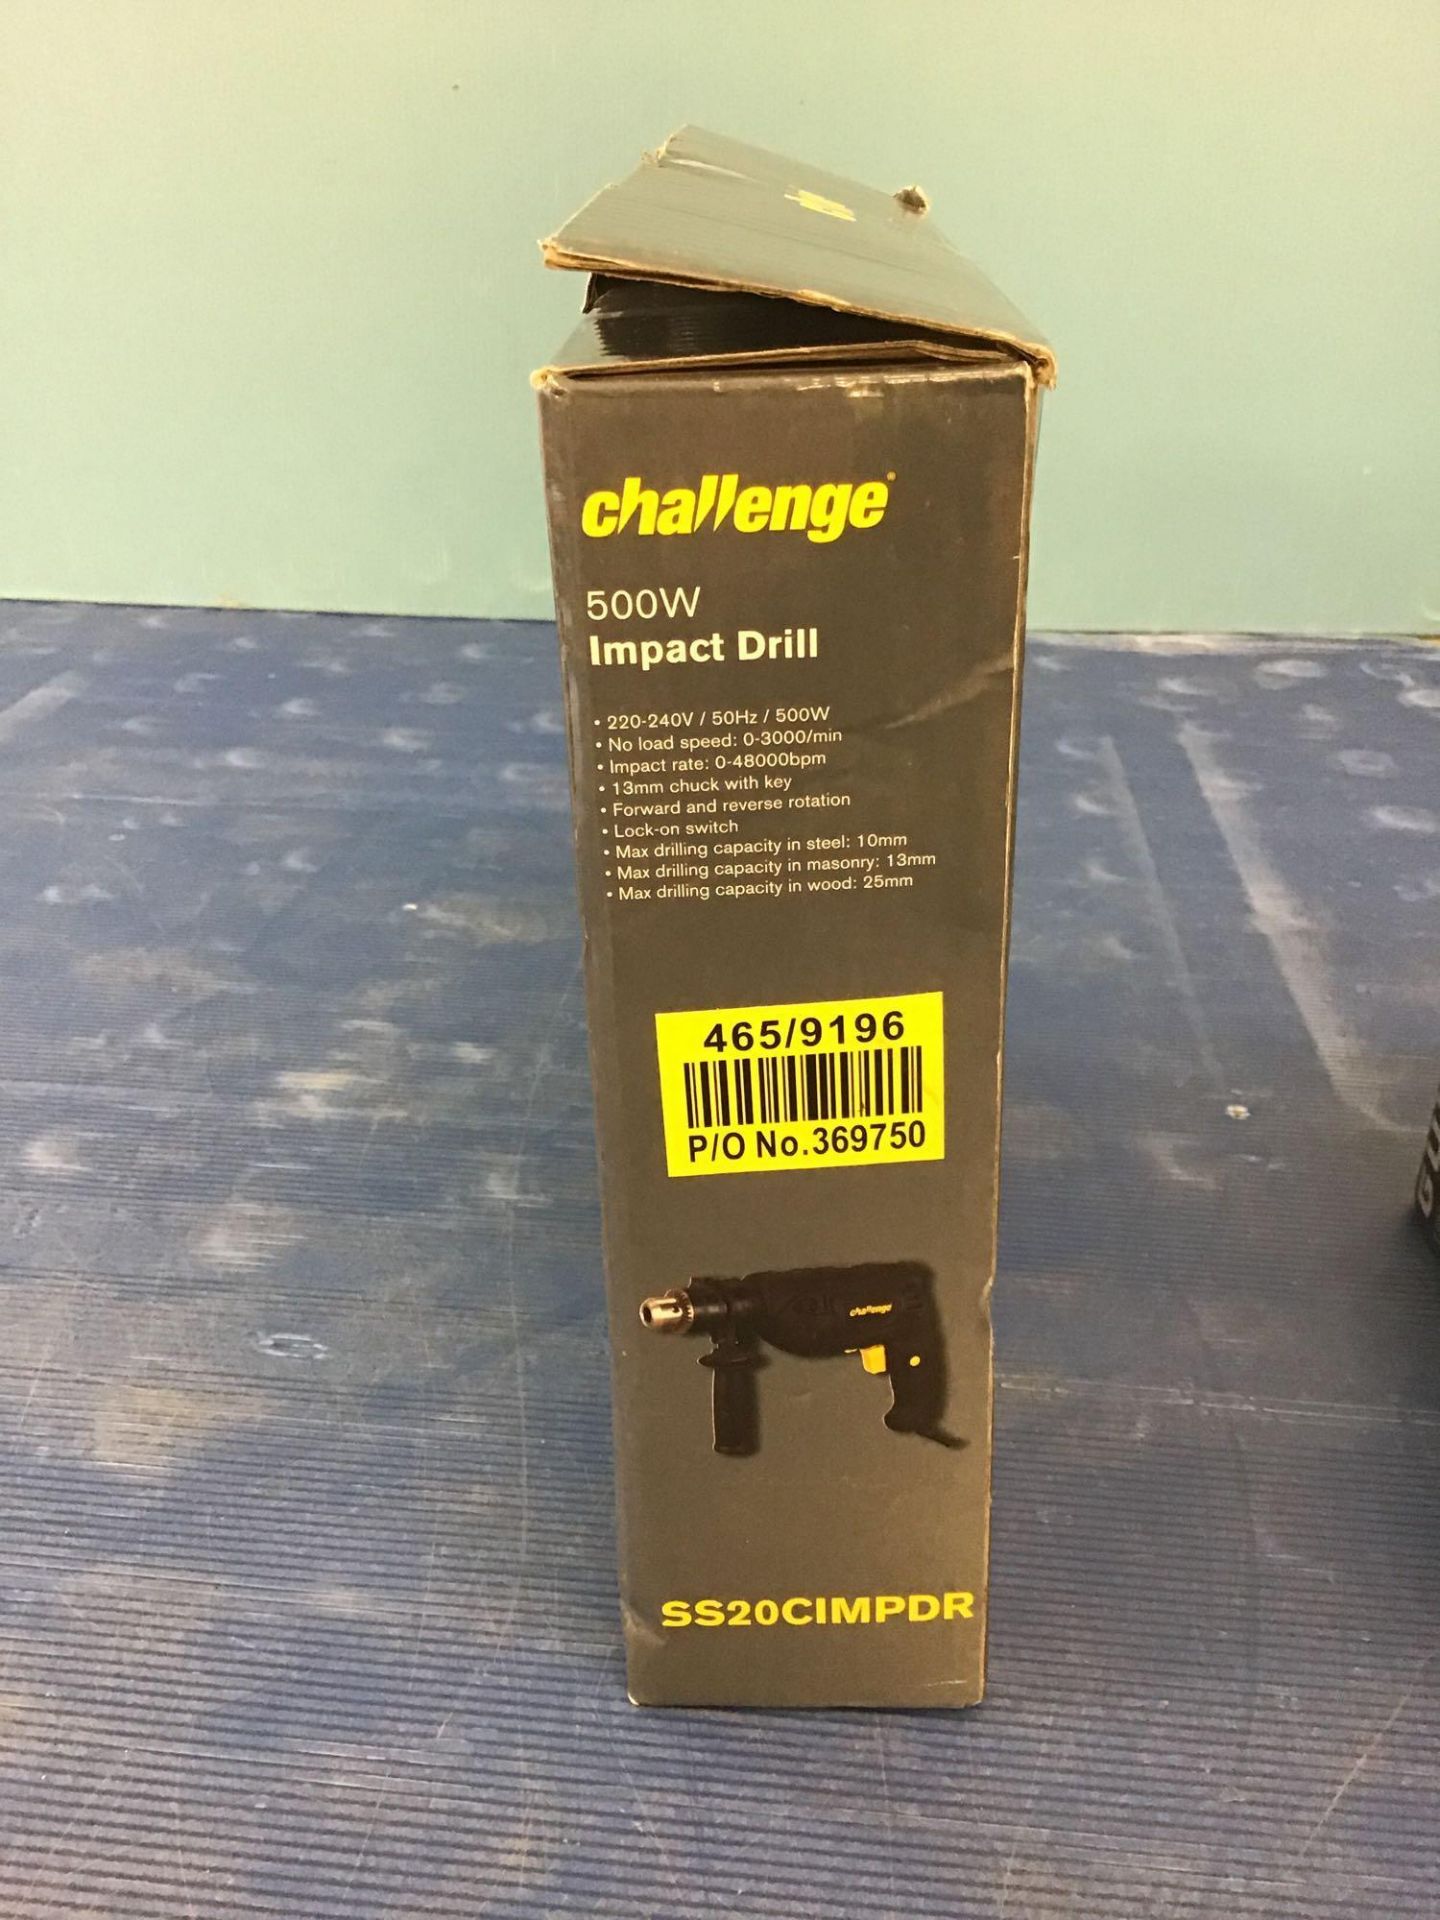 Challenge Corded Impact Drill - 500W, £15.00 RRP - Image 2 of 6